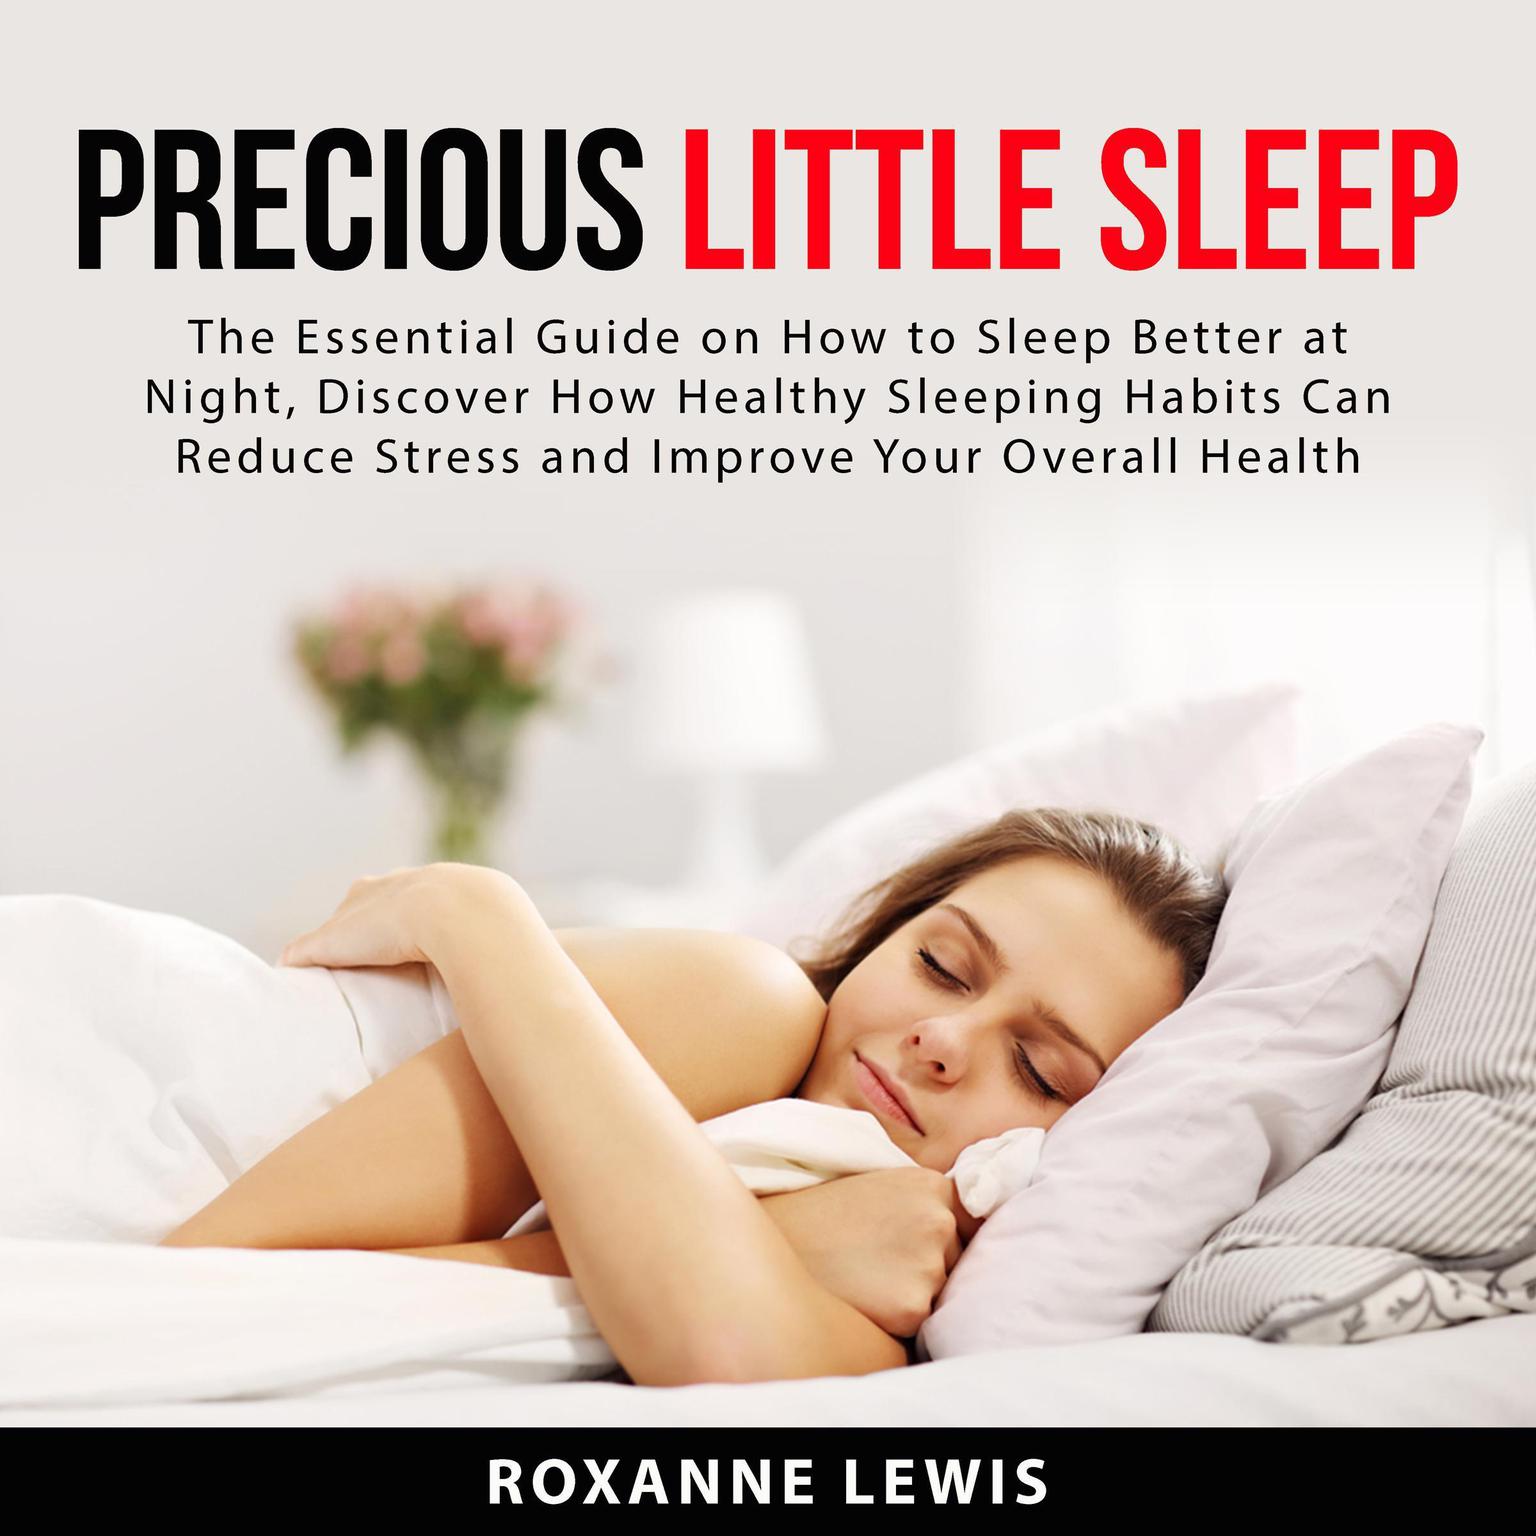 Precious Little Sleep: The Essential Guide on How to Sleep Better at Night, Discover How Healthy Sleeping Habits Can Reduce Stress and Improve Your Overall Health Audiobook, by Roxanne Lewis